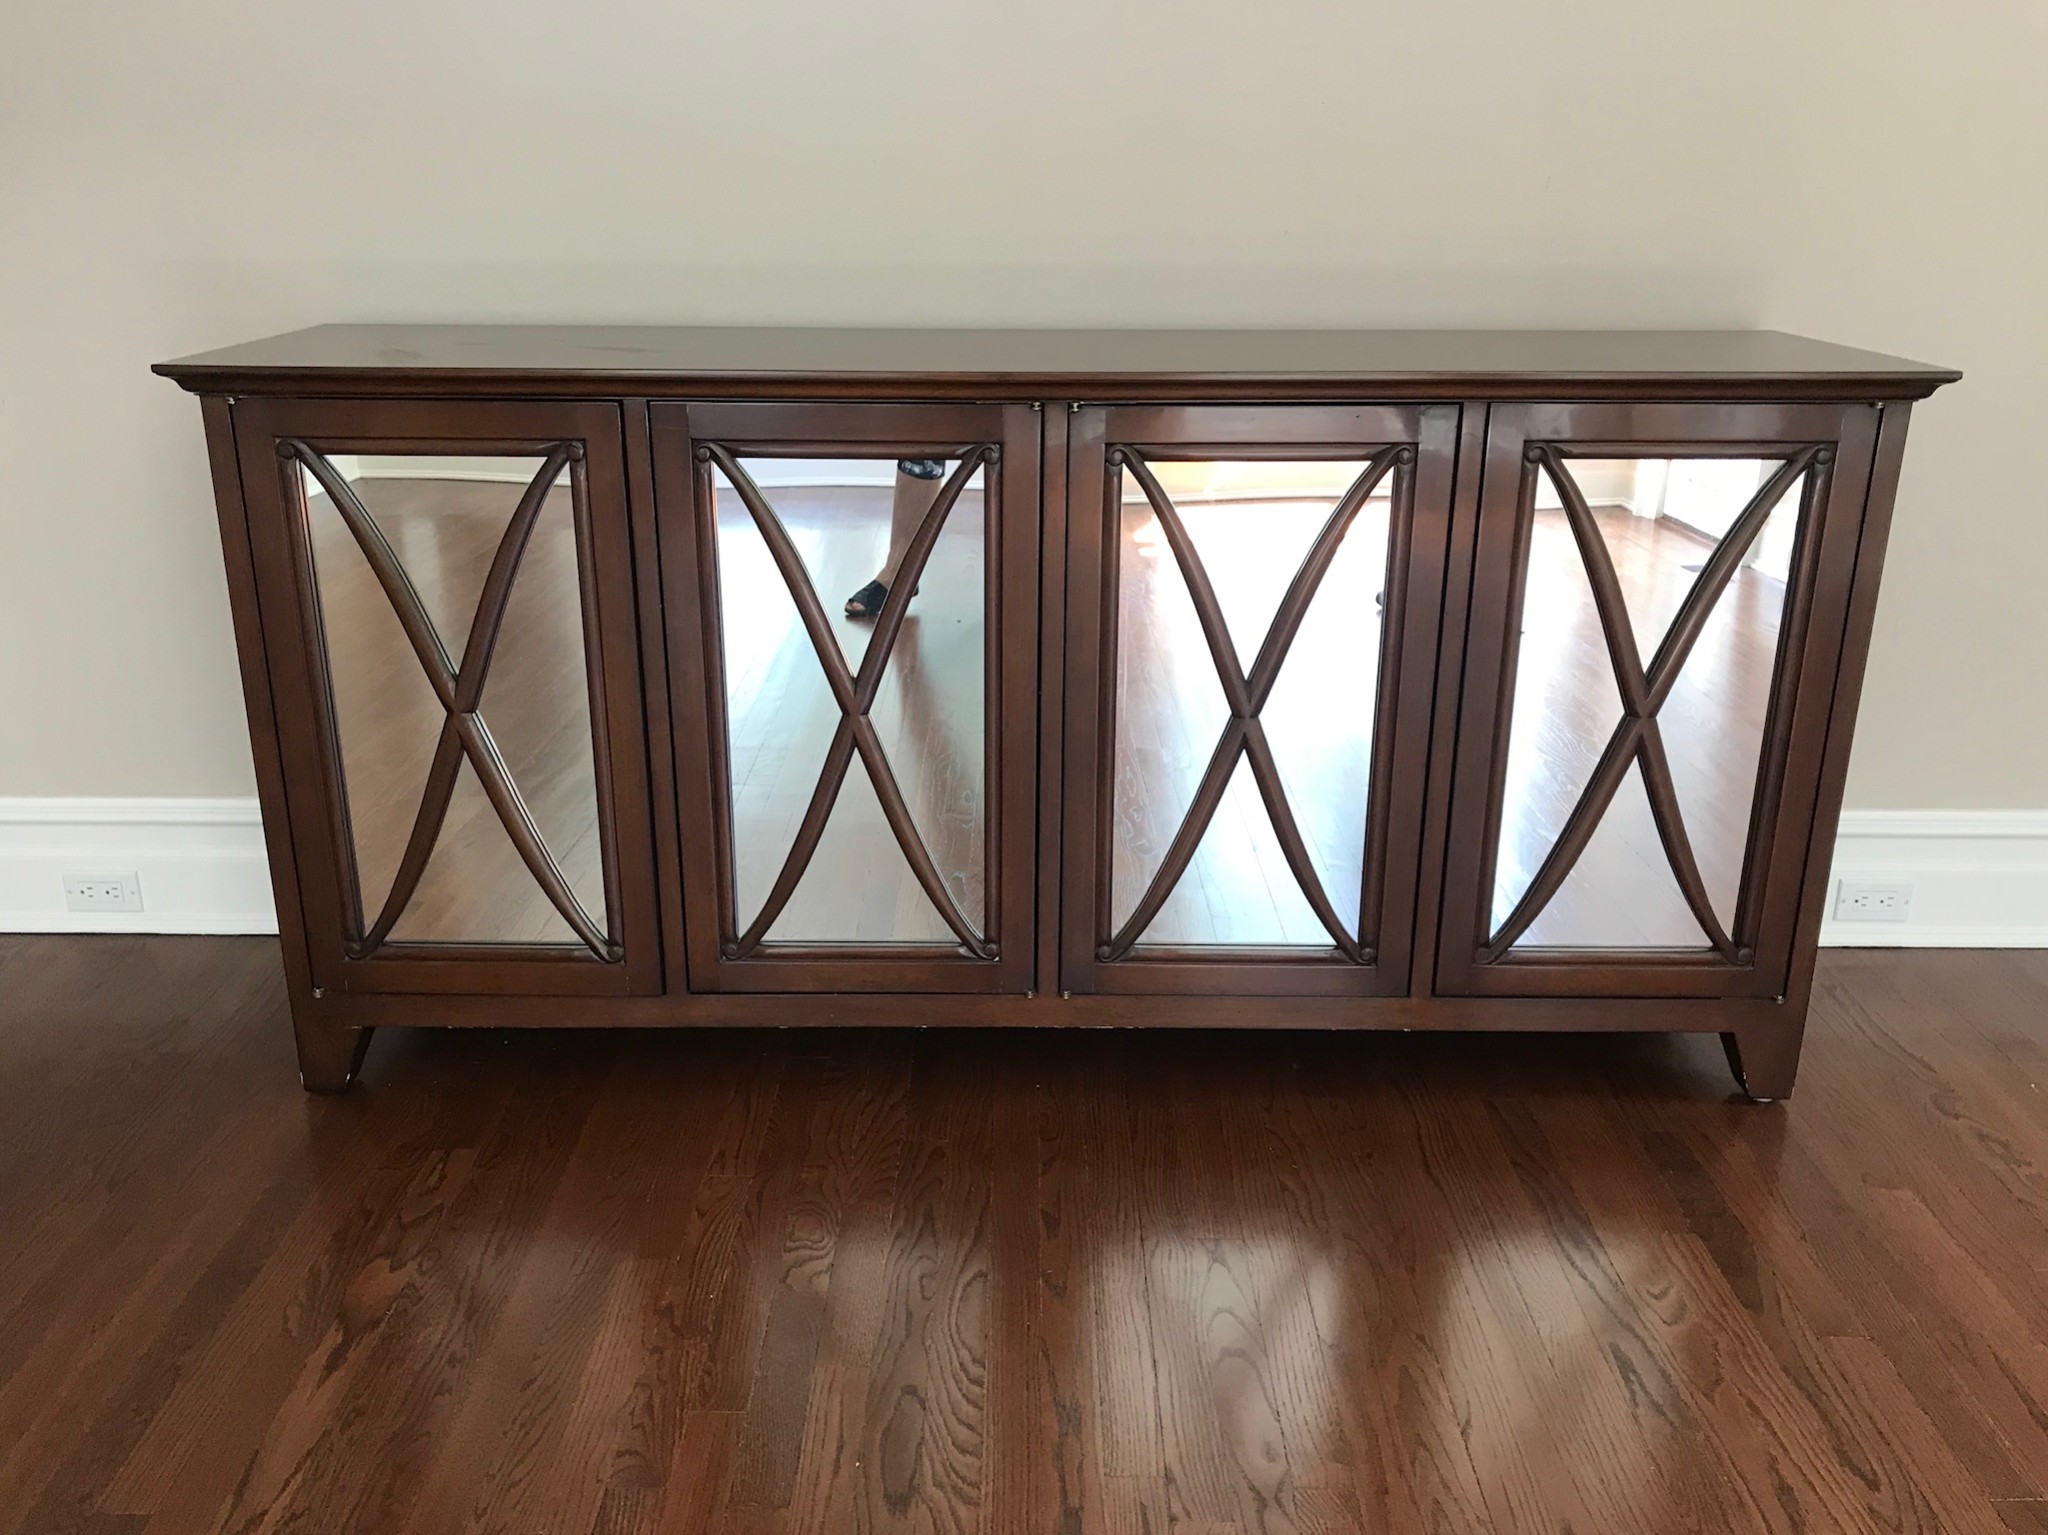 Lovely Mirrored Nancy Corzine Home Office Credenza or Consol